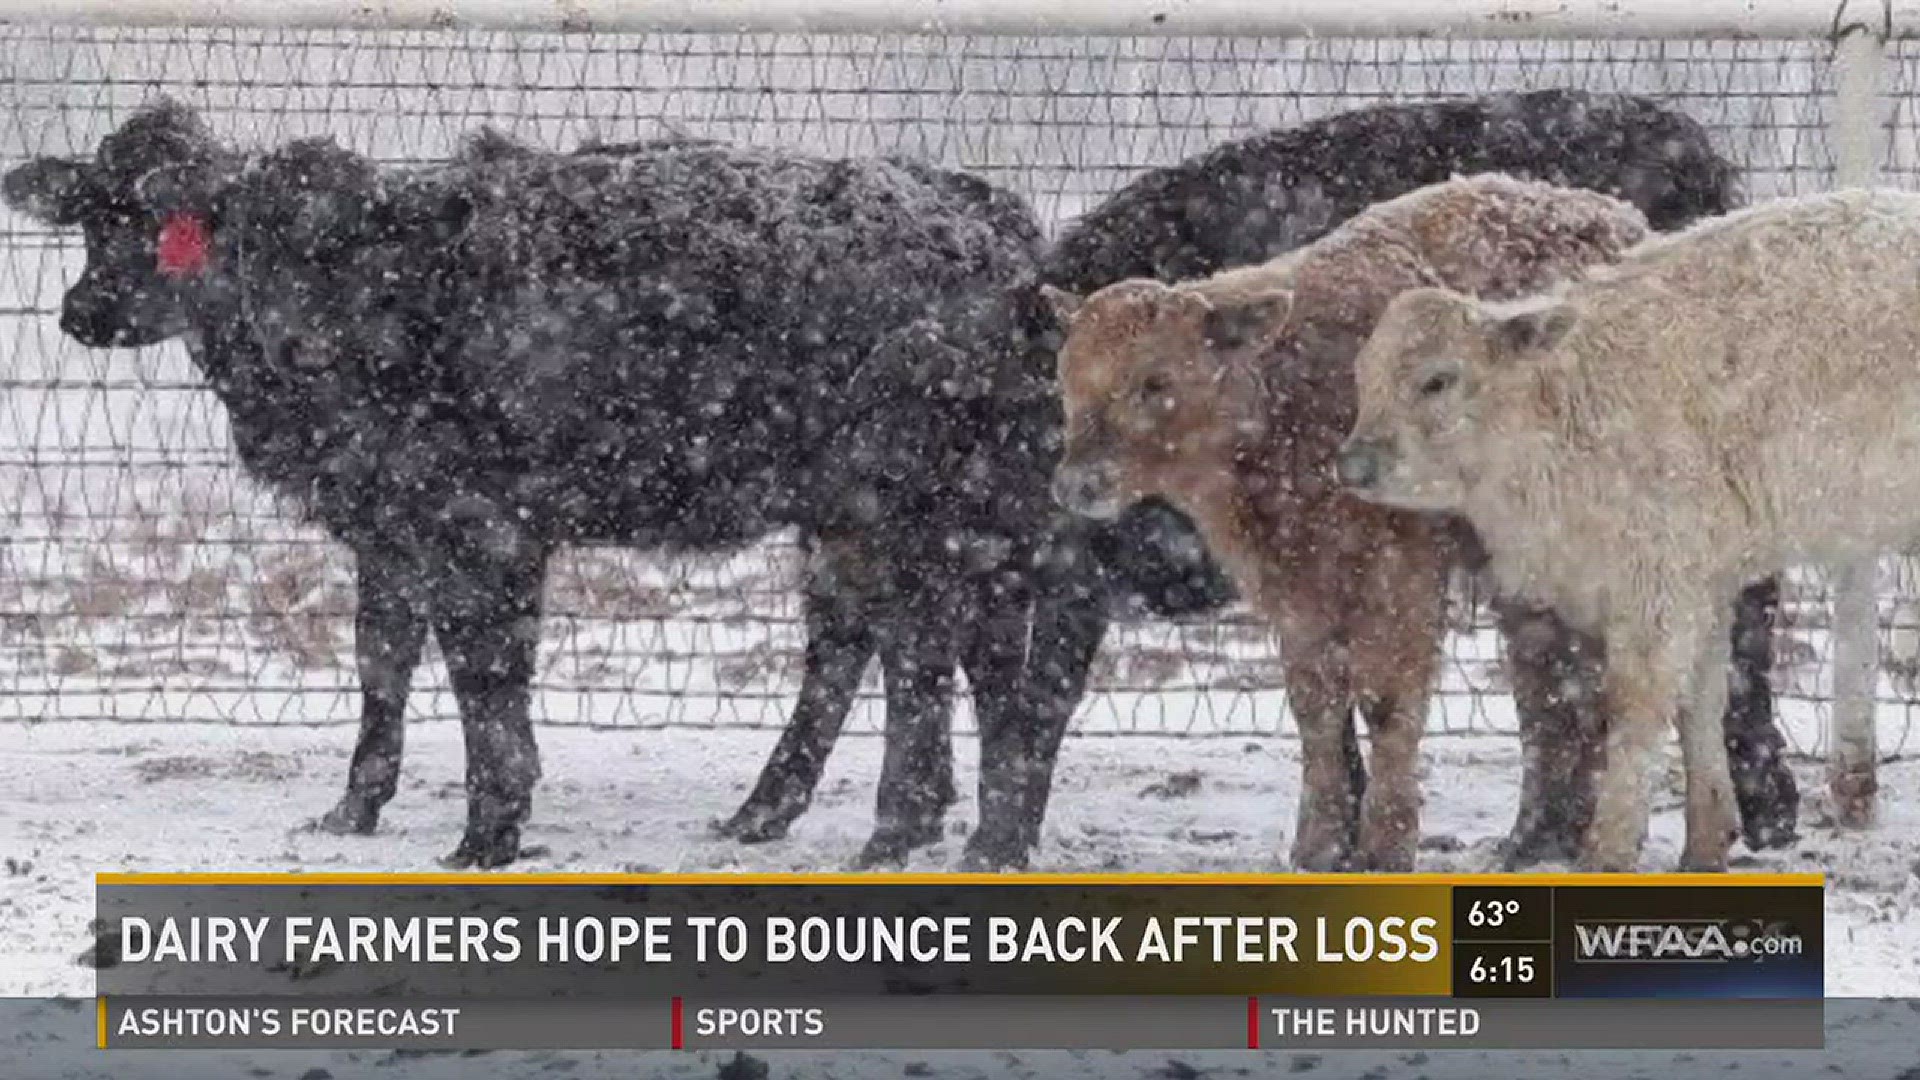 More than 35,000 dairy cows perished in the brutal December storm.